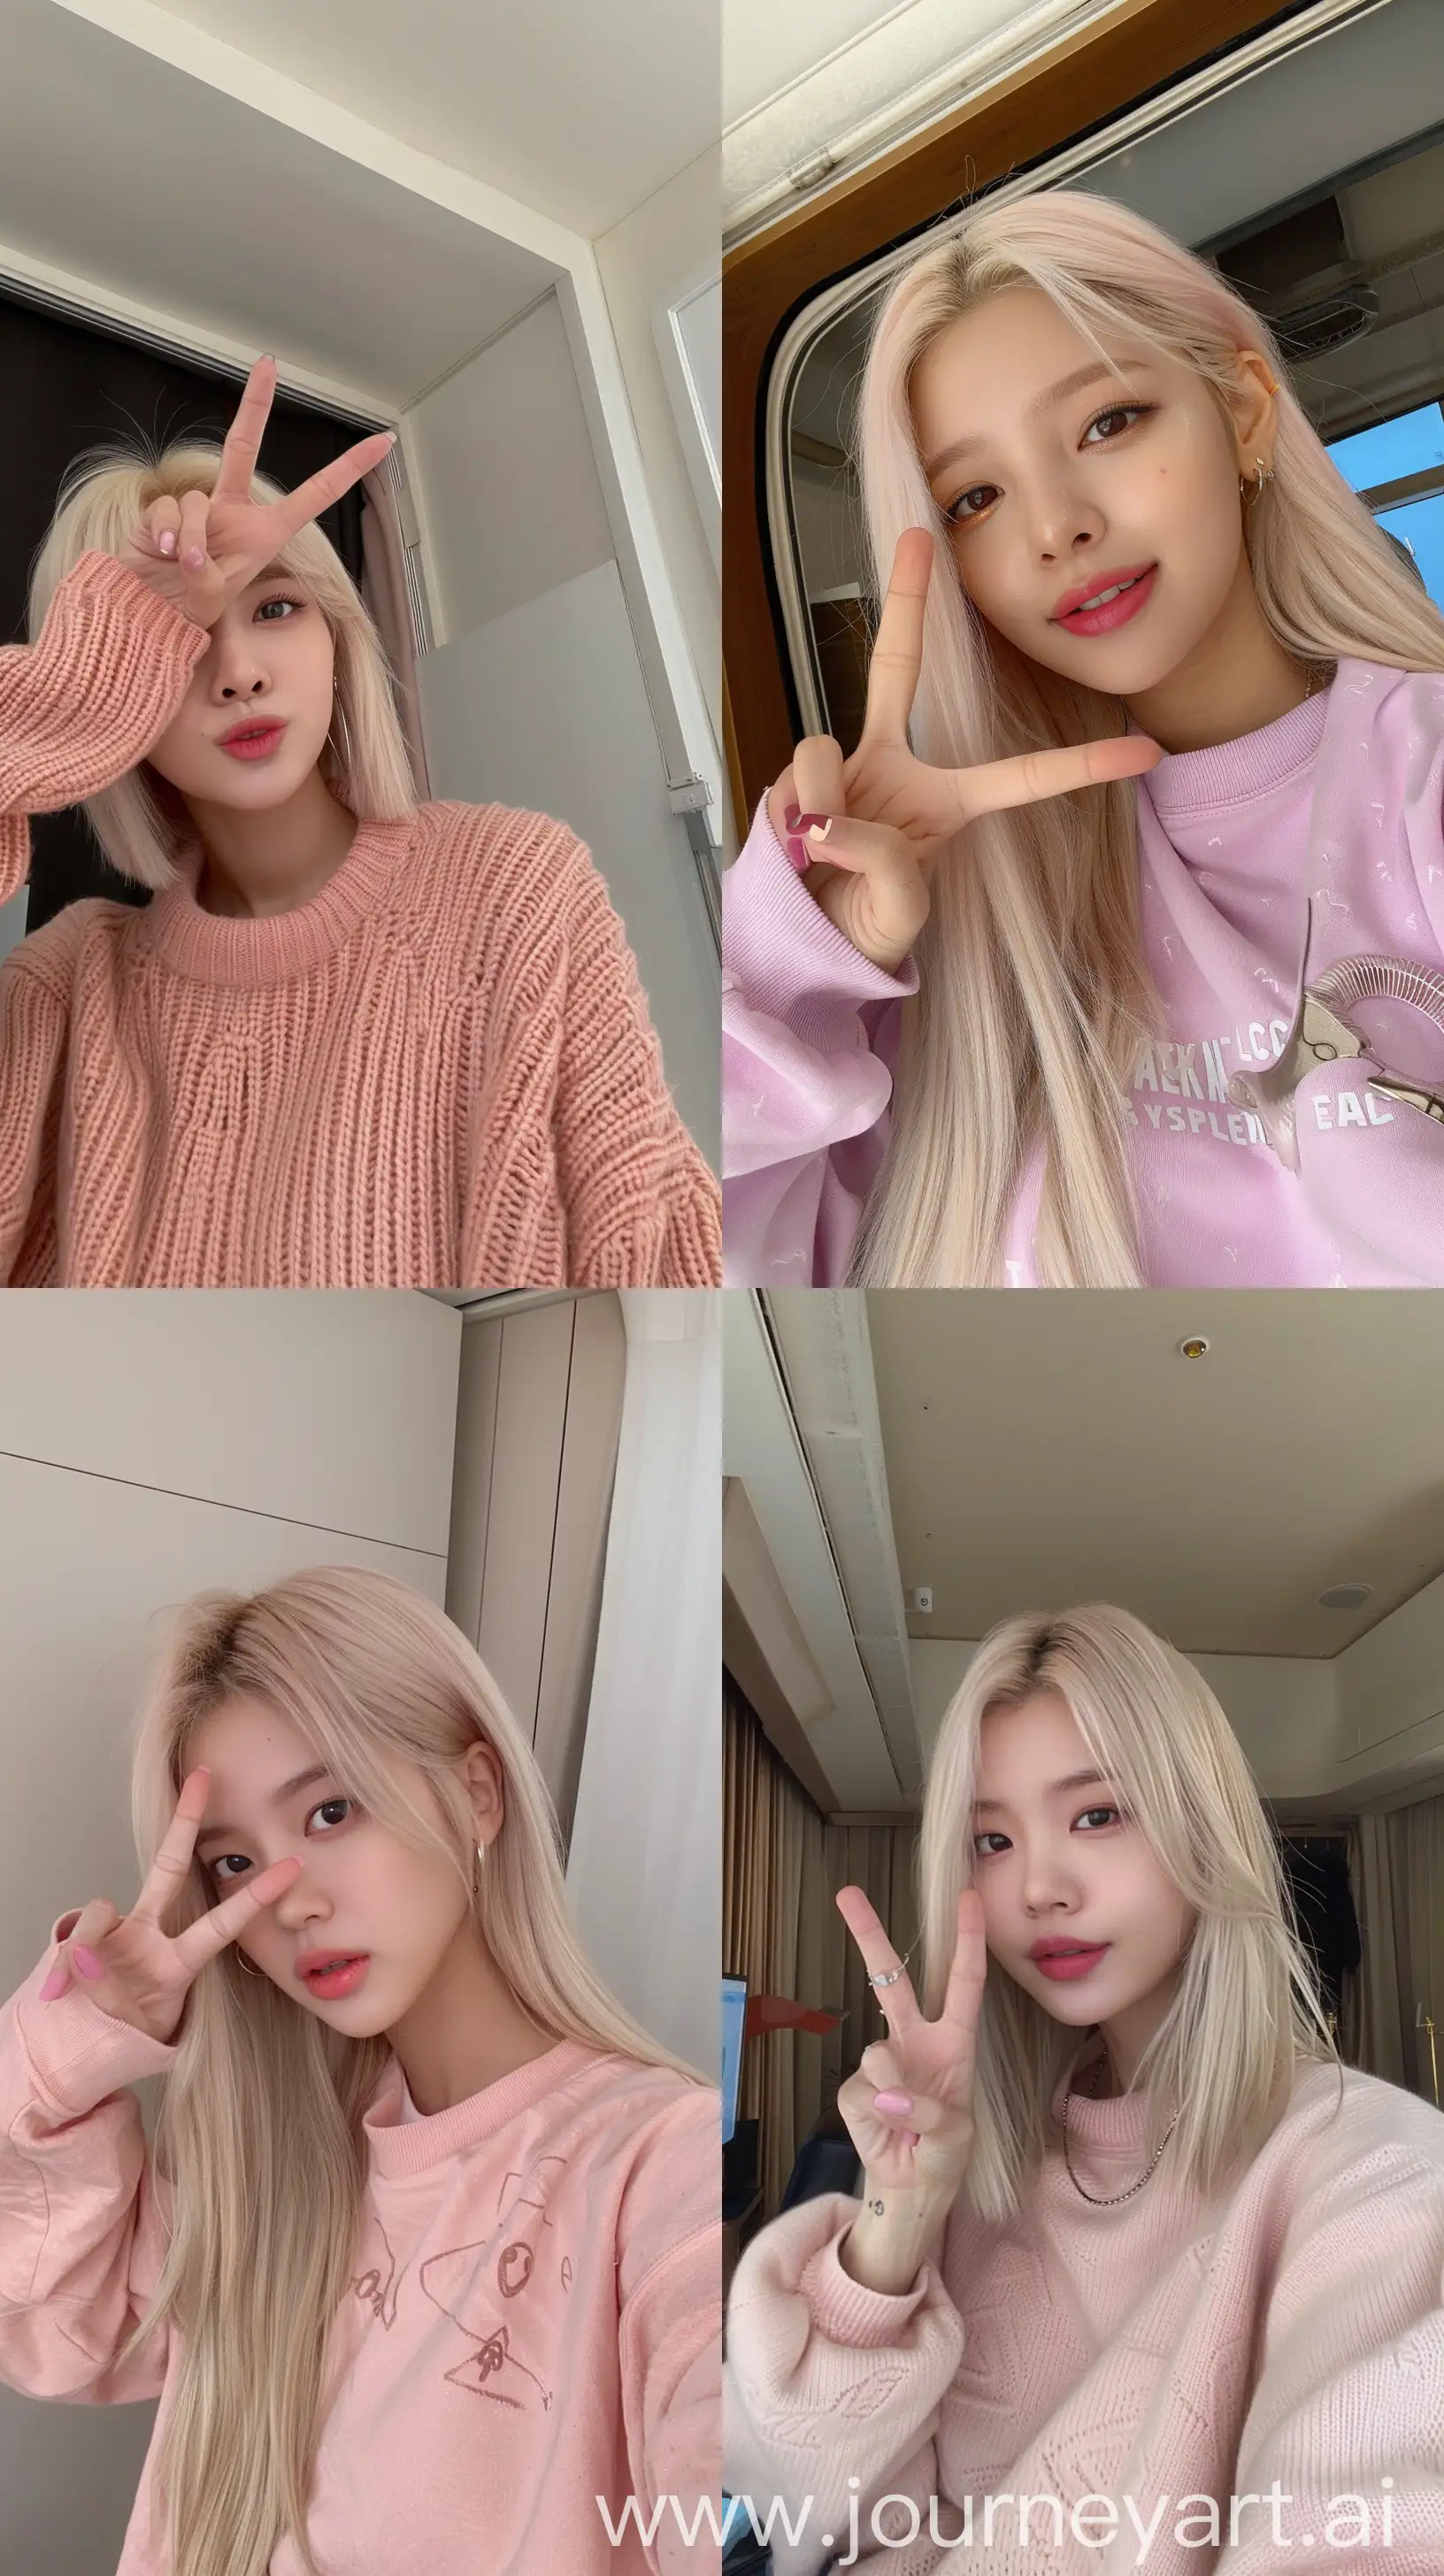 Blackpinks-Jennie-Aesthetic-Selfie-with-Blonde-Wolfcut-Hair-and-Pink-Cardigan